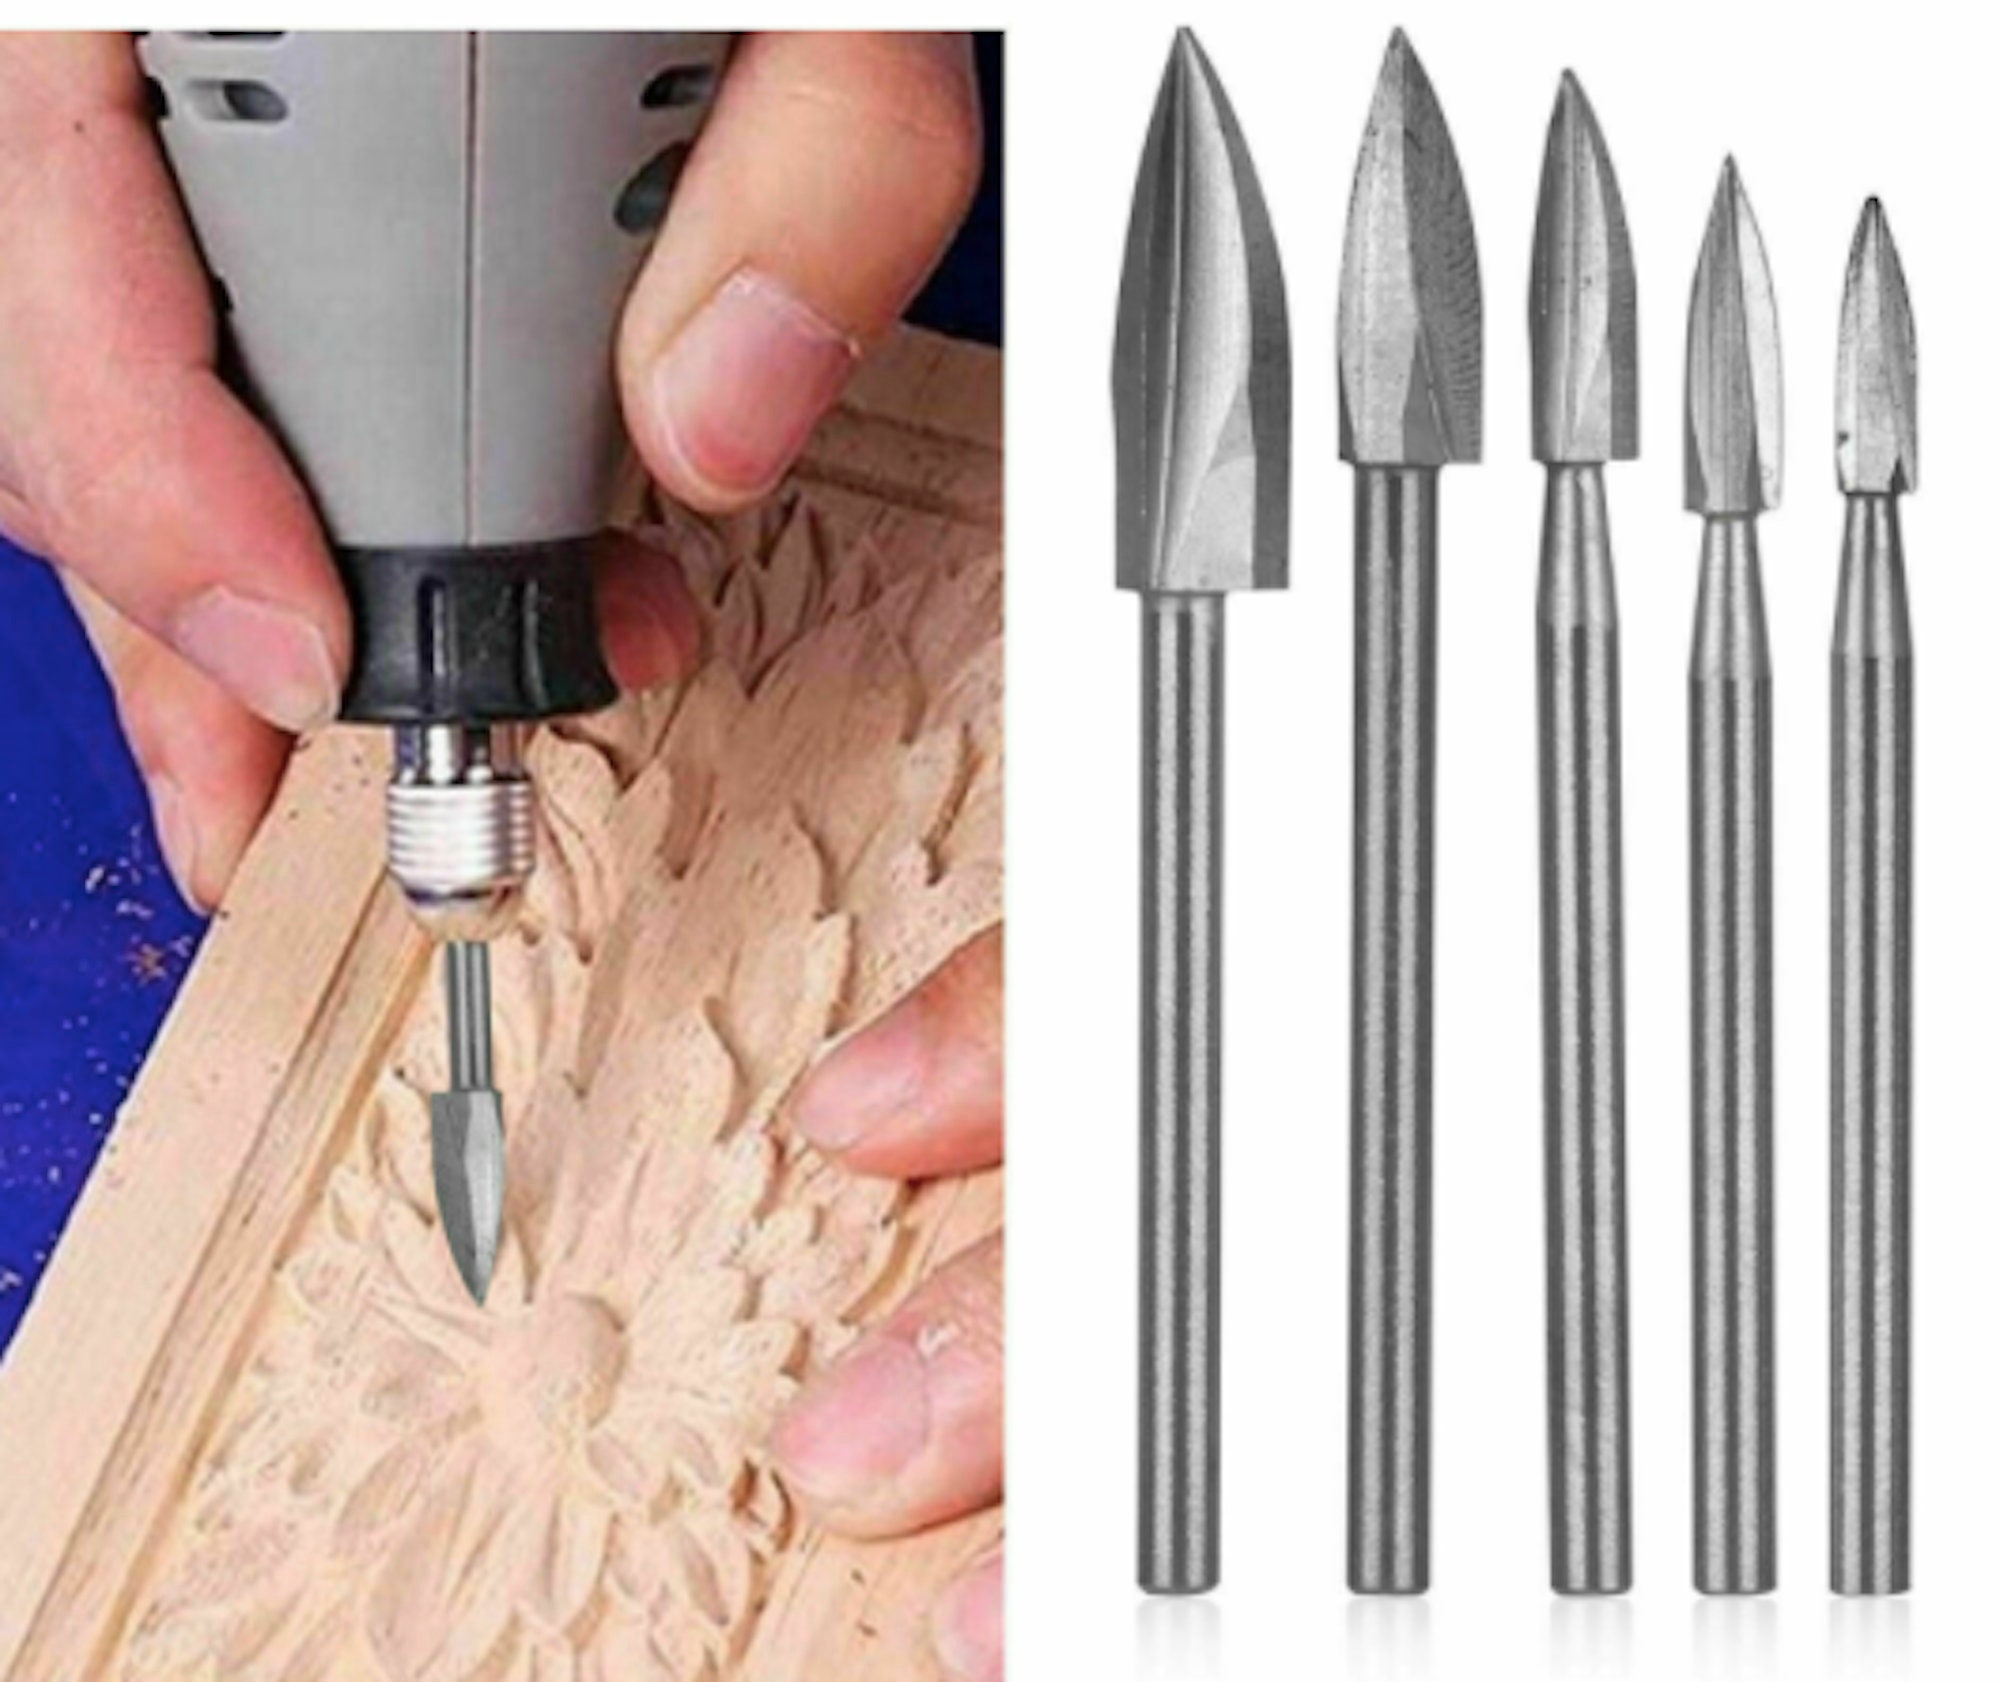 Wood Carving And Engraving Drill Bit Milling Root Cutter Carving Tools 5Pcs/Set 